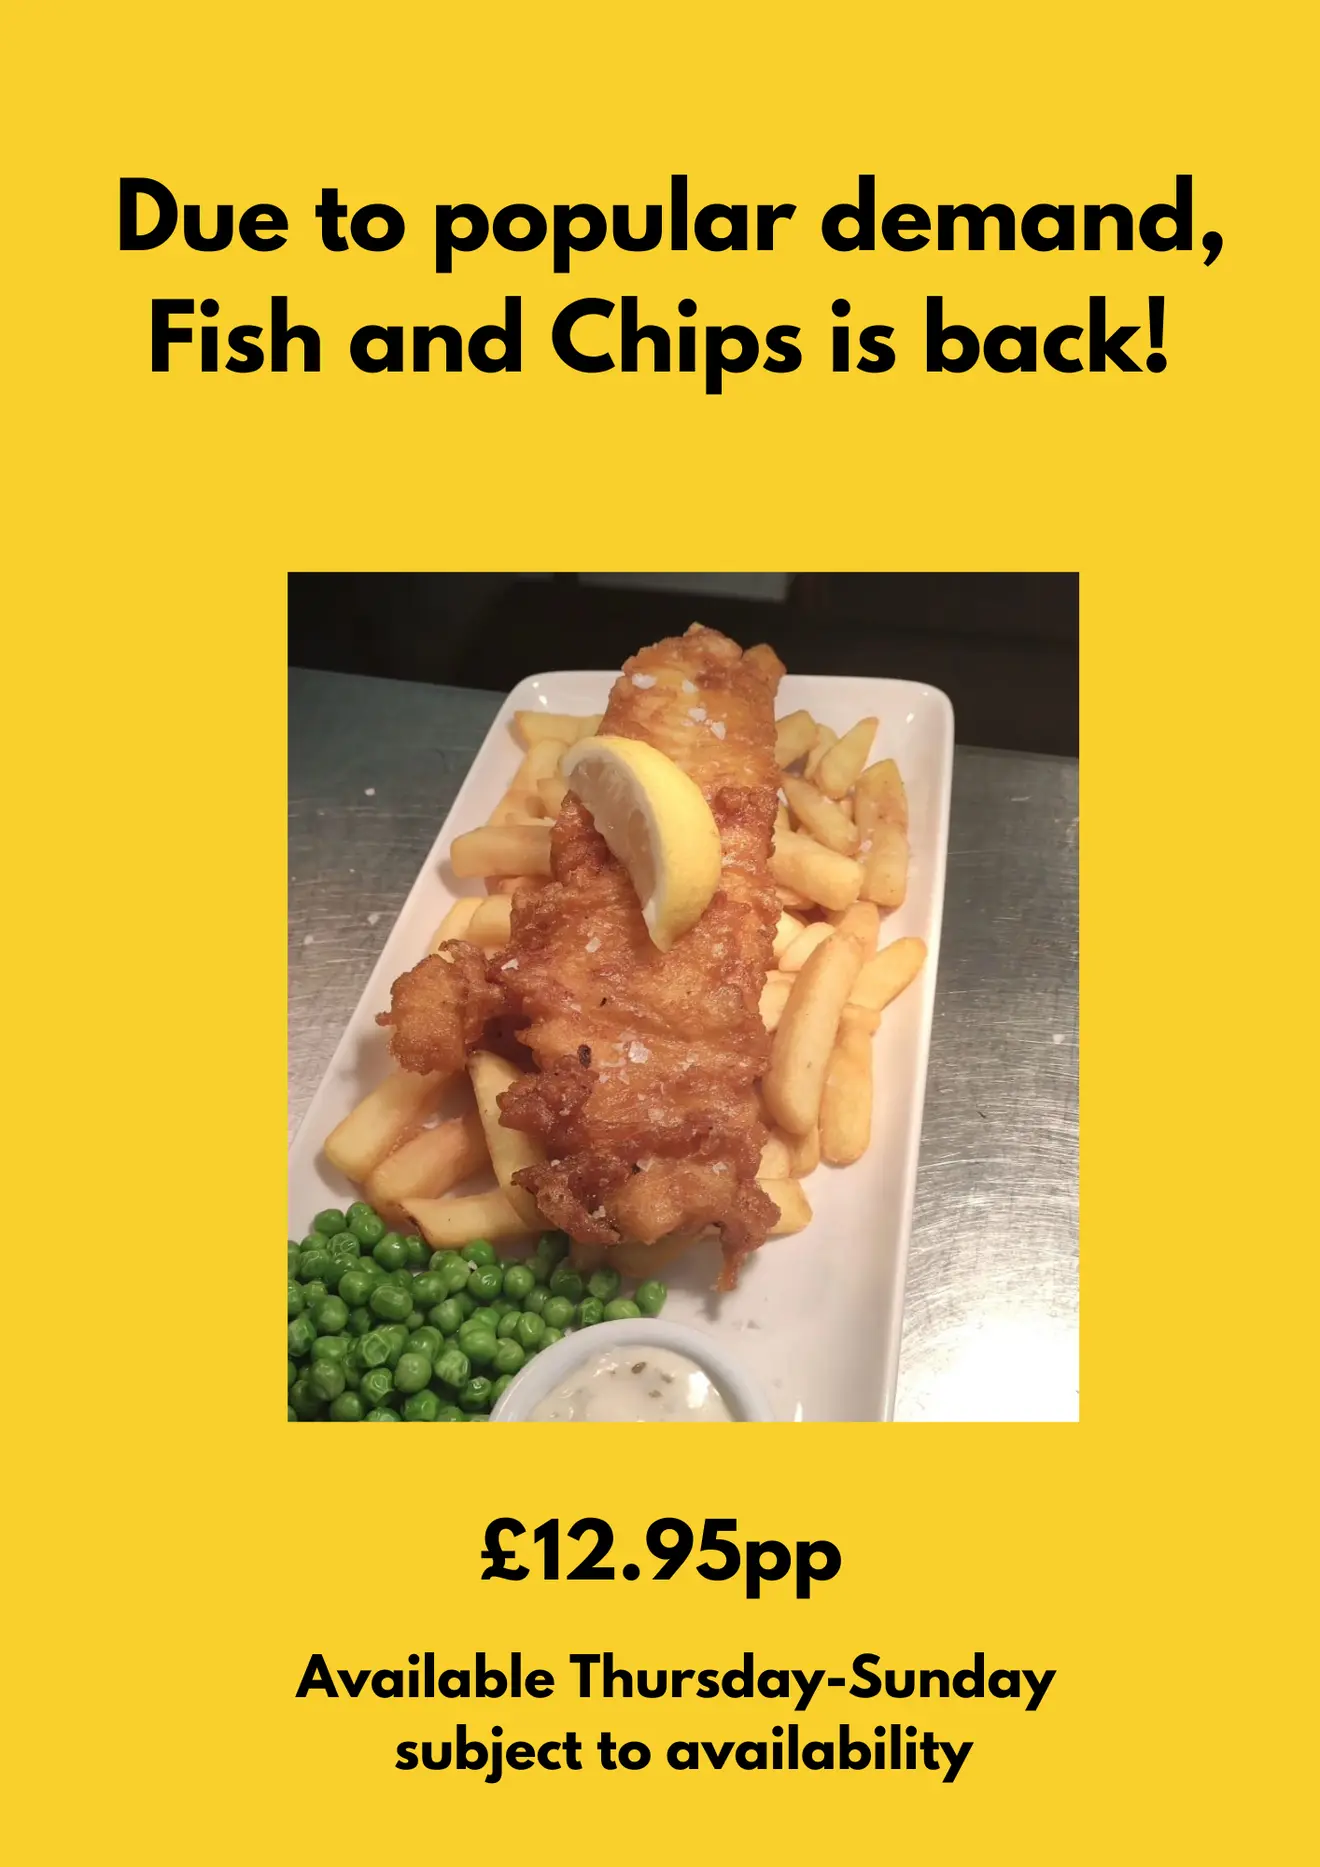 Fish and Chips is back on due to popular demand!